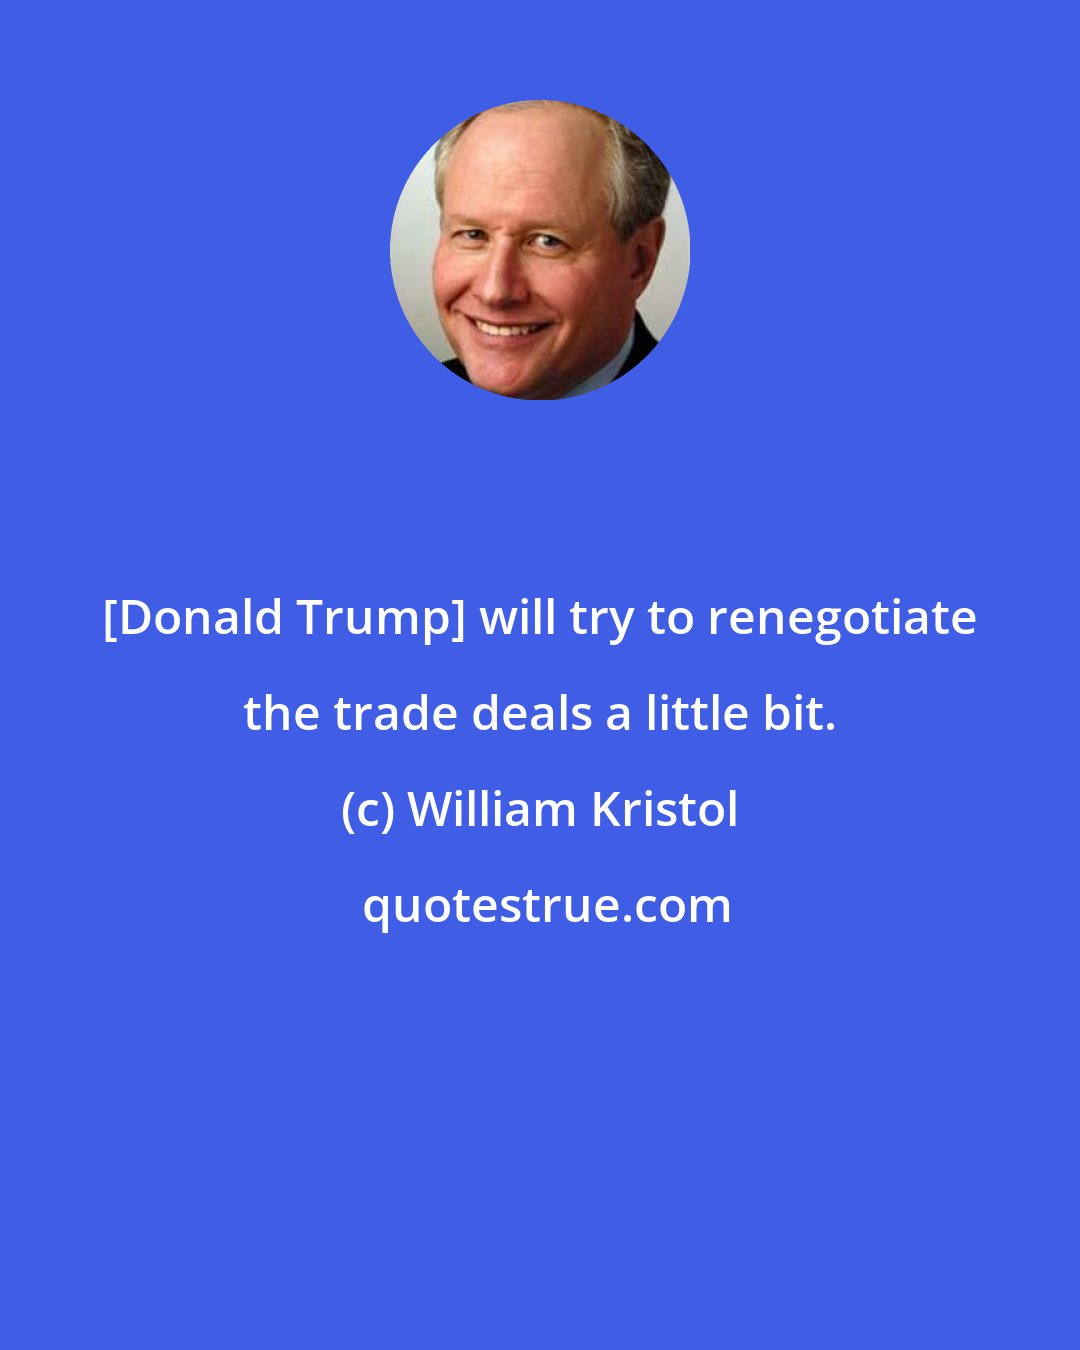 William Kristol: [Donald Trump] will try to renegotiate the trade deals a little bit.